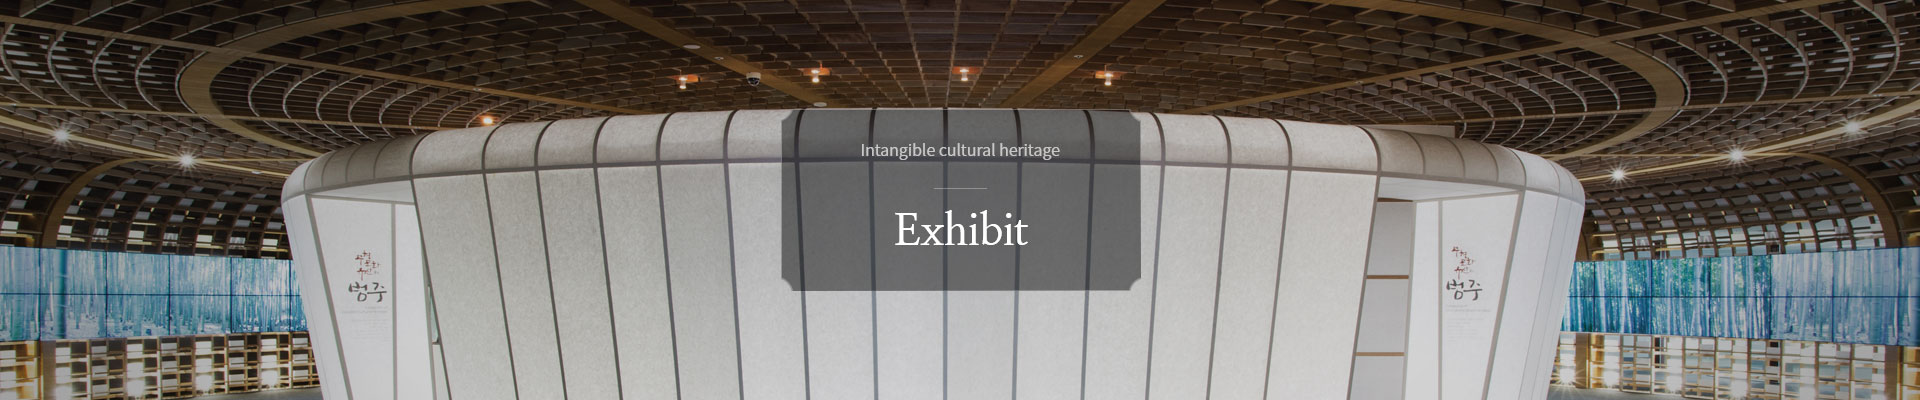 Intangible cultural heritage, Exhibit